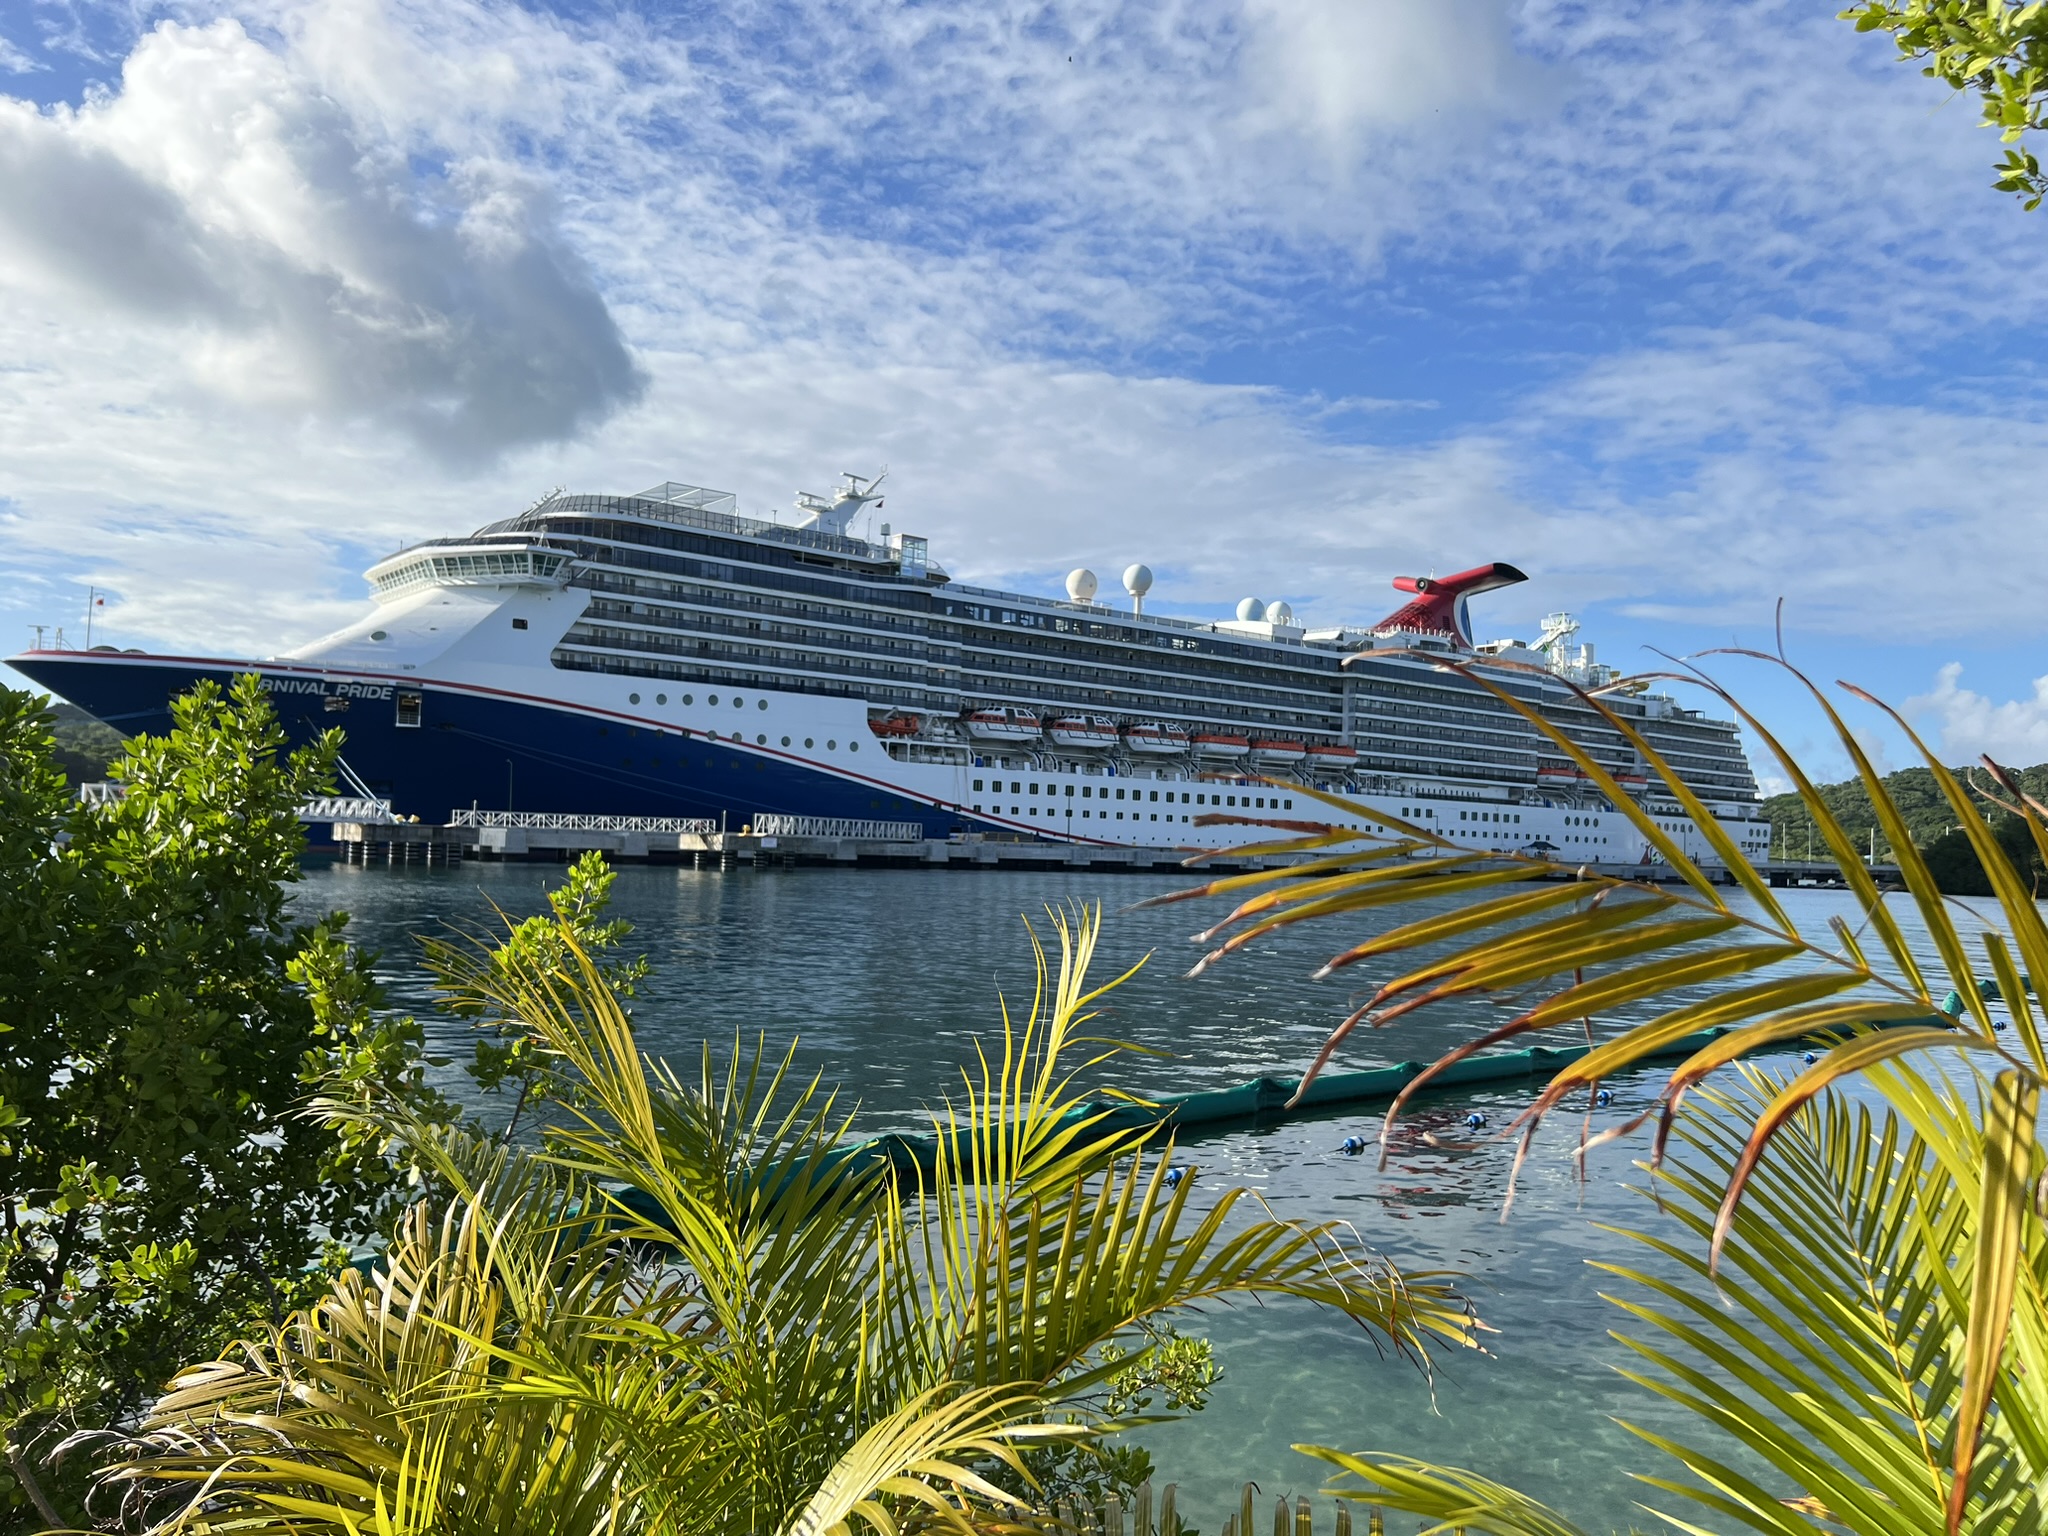 Cruise Ship Reviews – Cruise Ship Carnival Pride Review Including Likes and Dislikes of the Ship